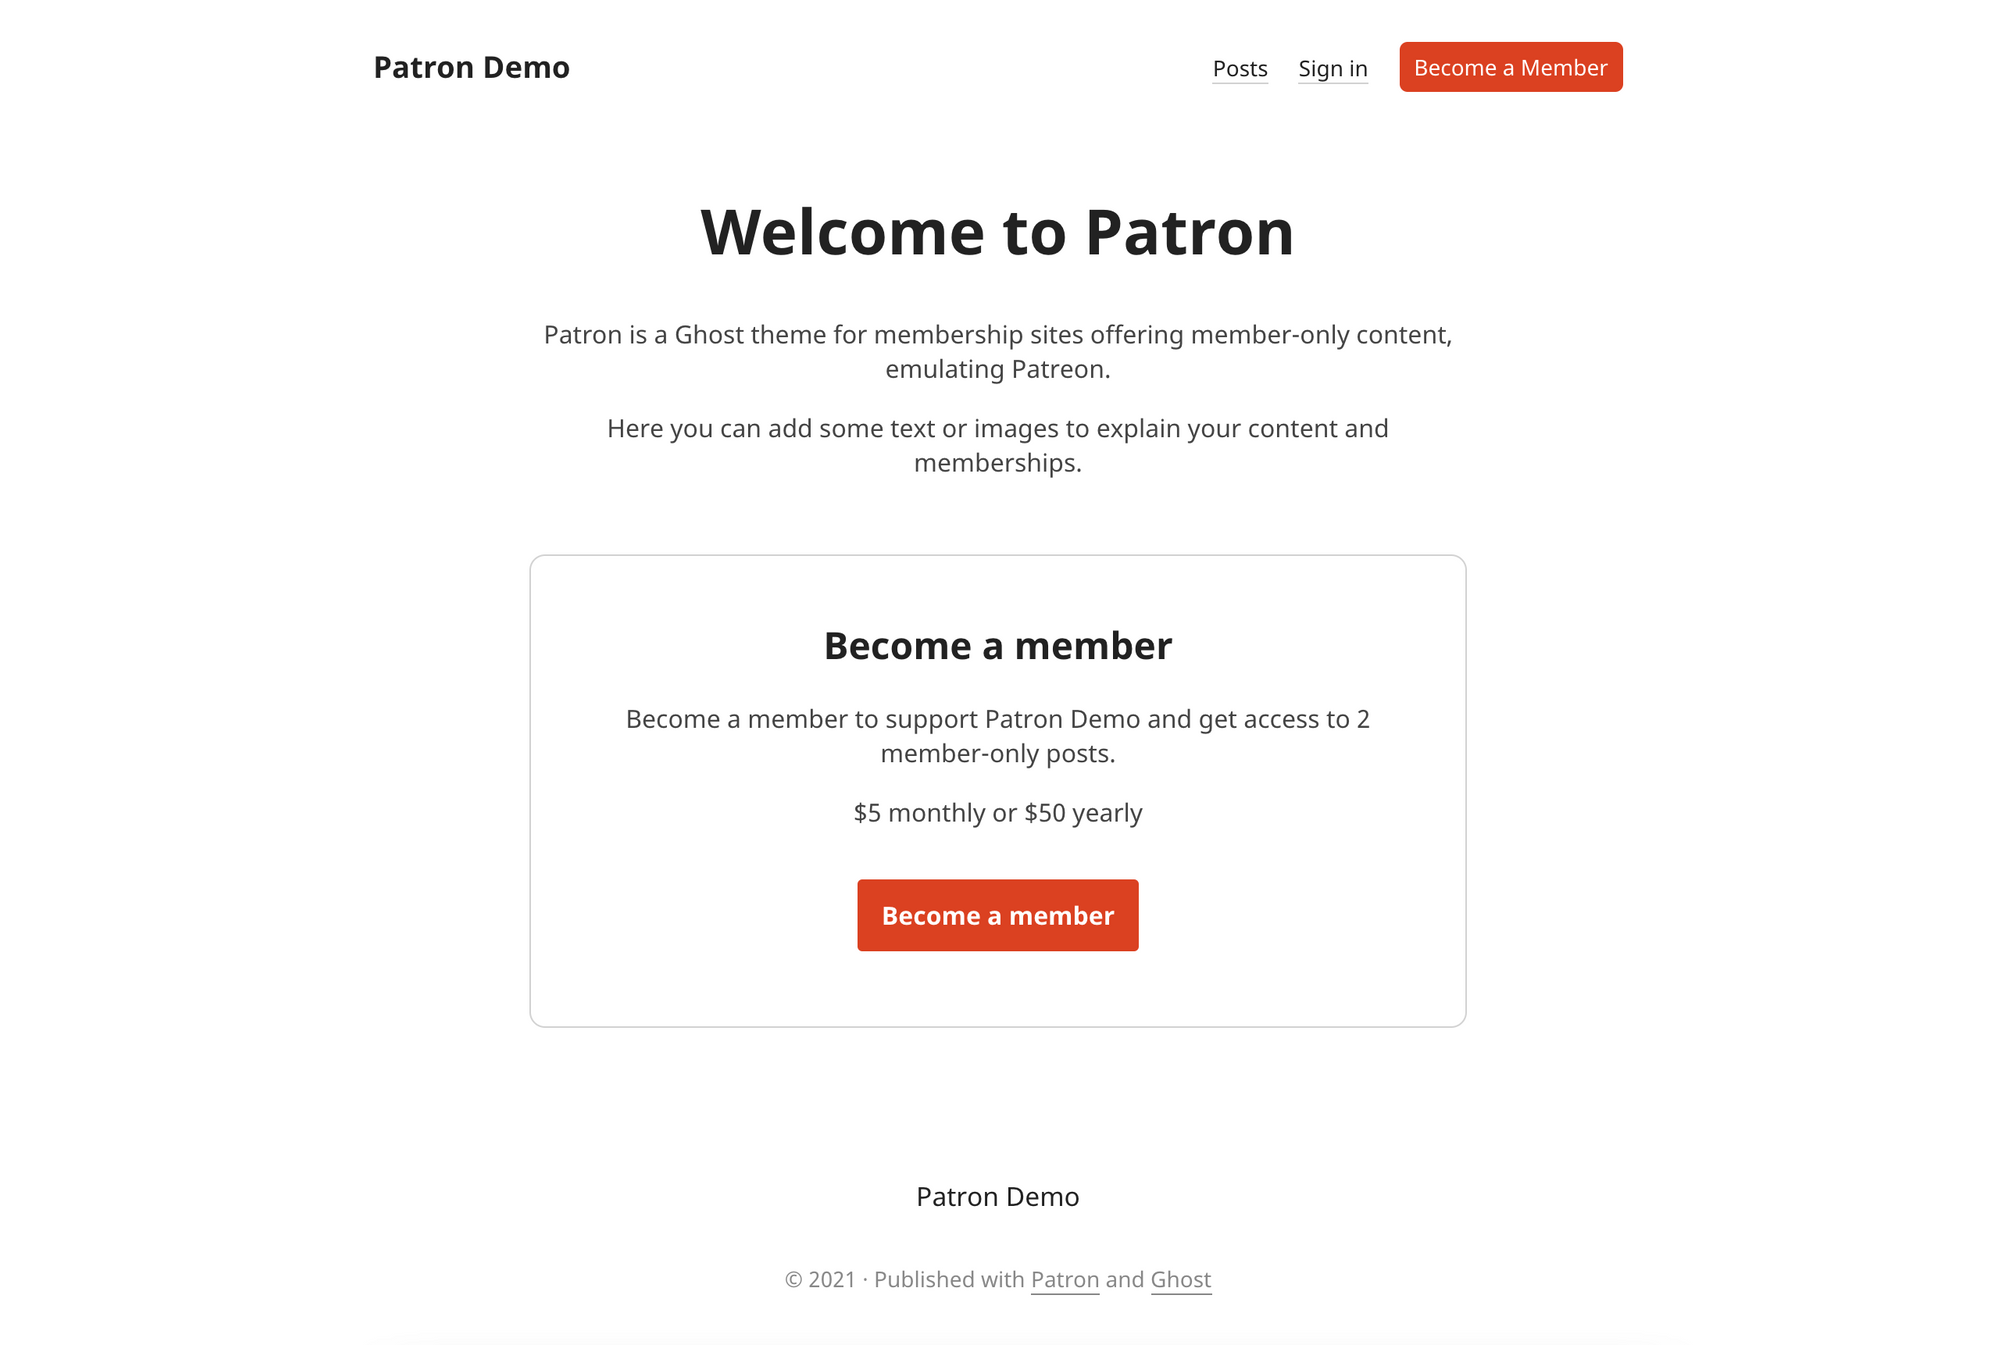 How to launch your own Patreon-like site with Ghost